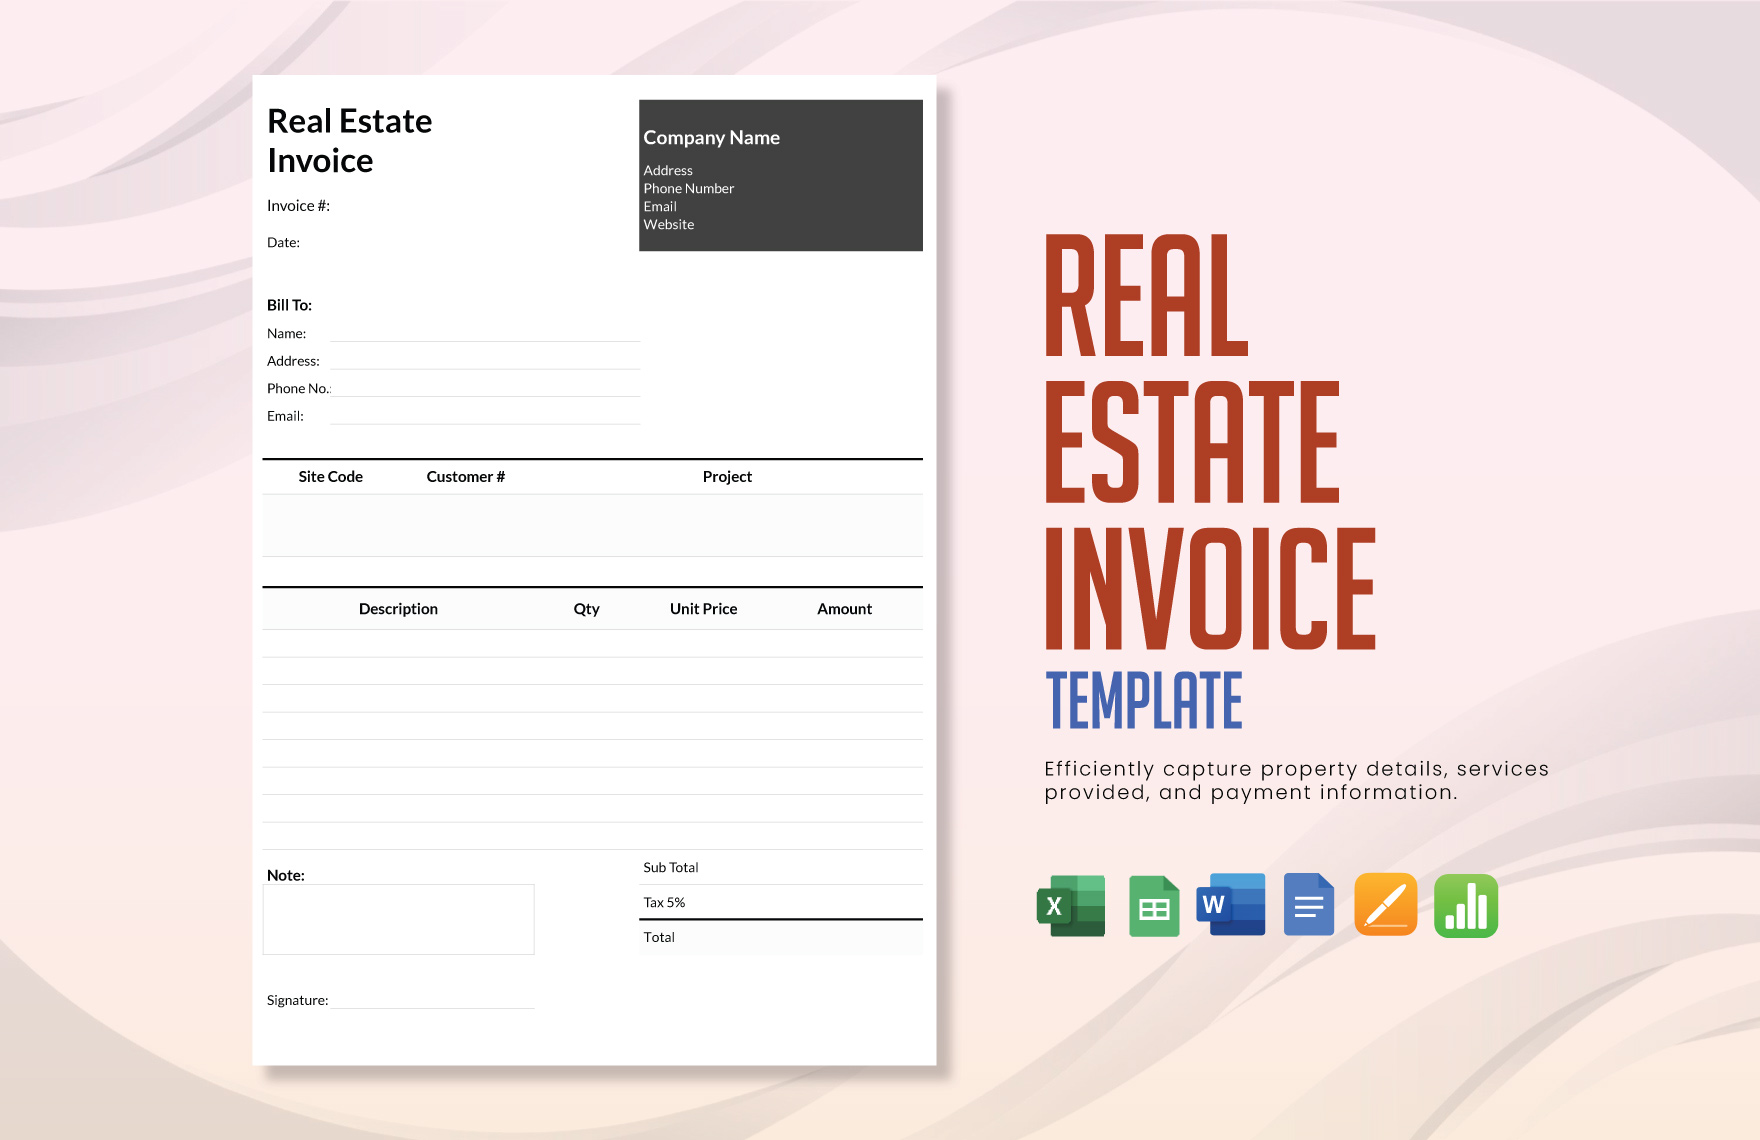 Blank Real Estate Invoice Template